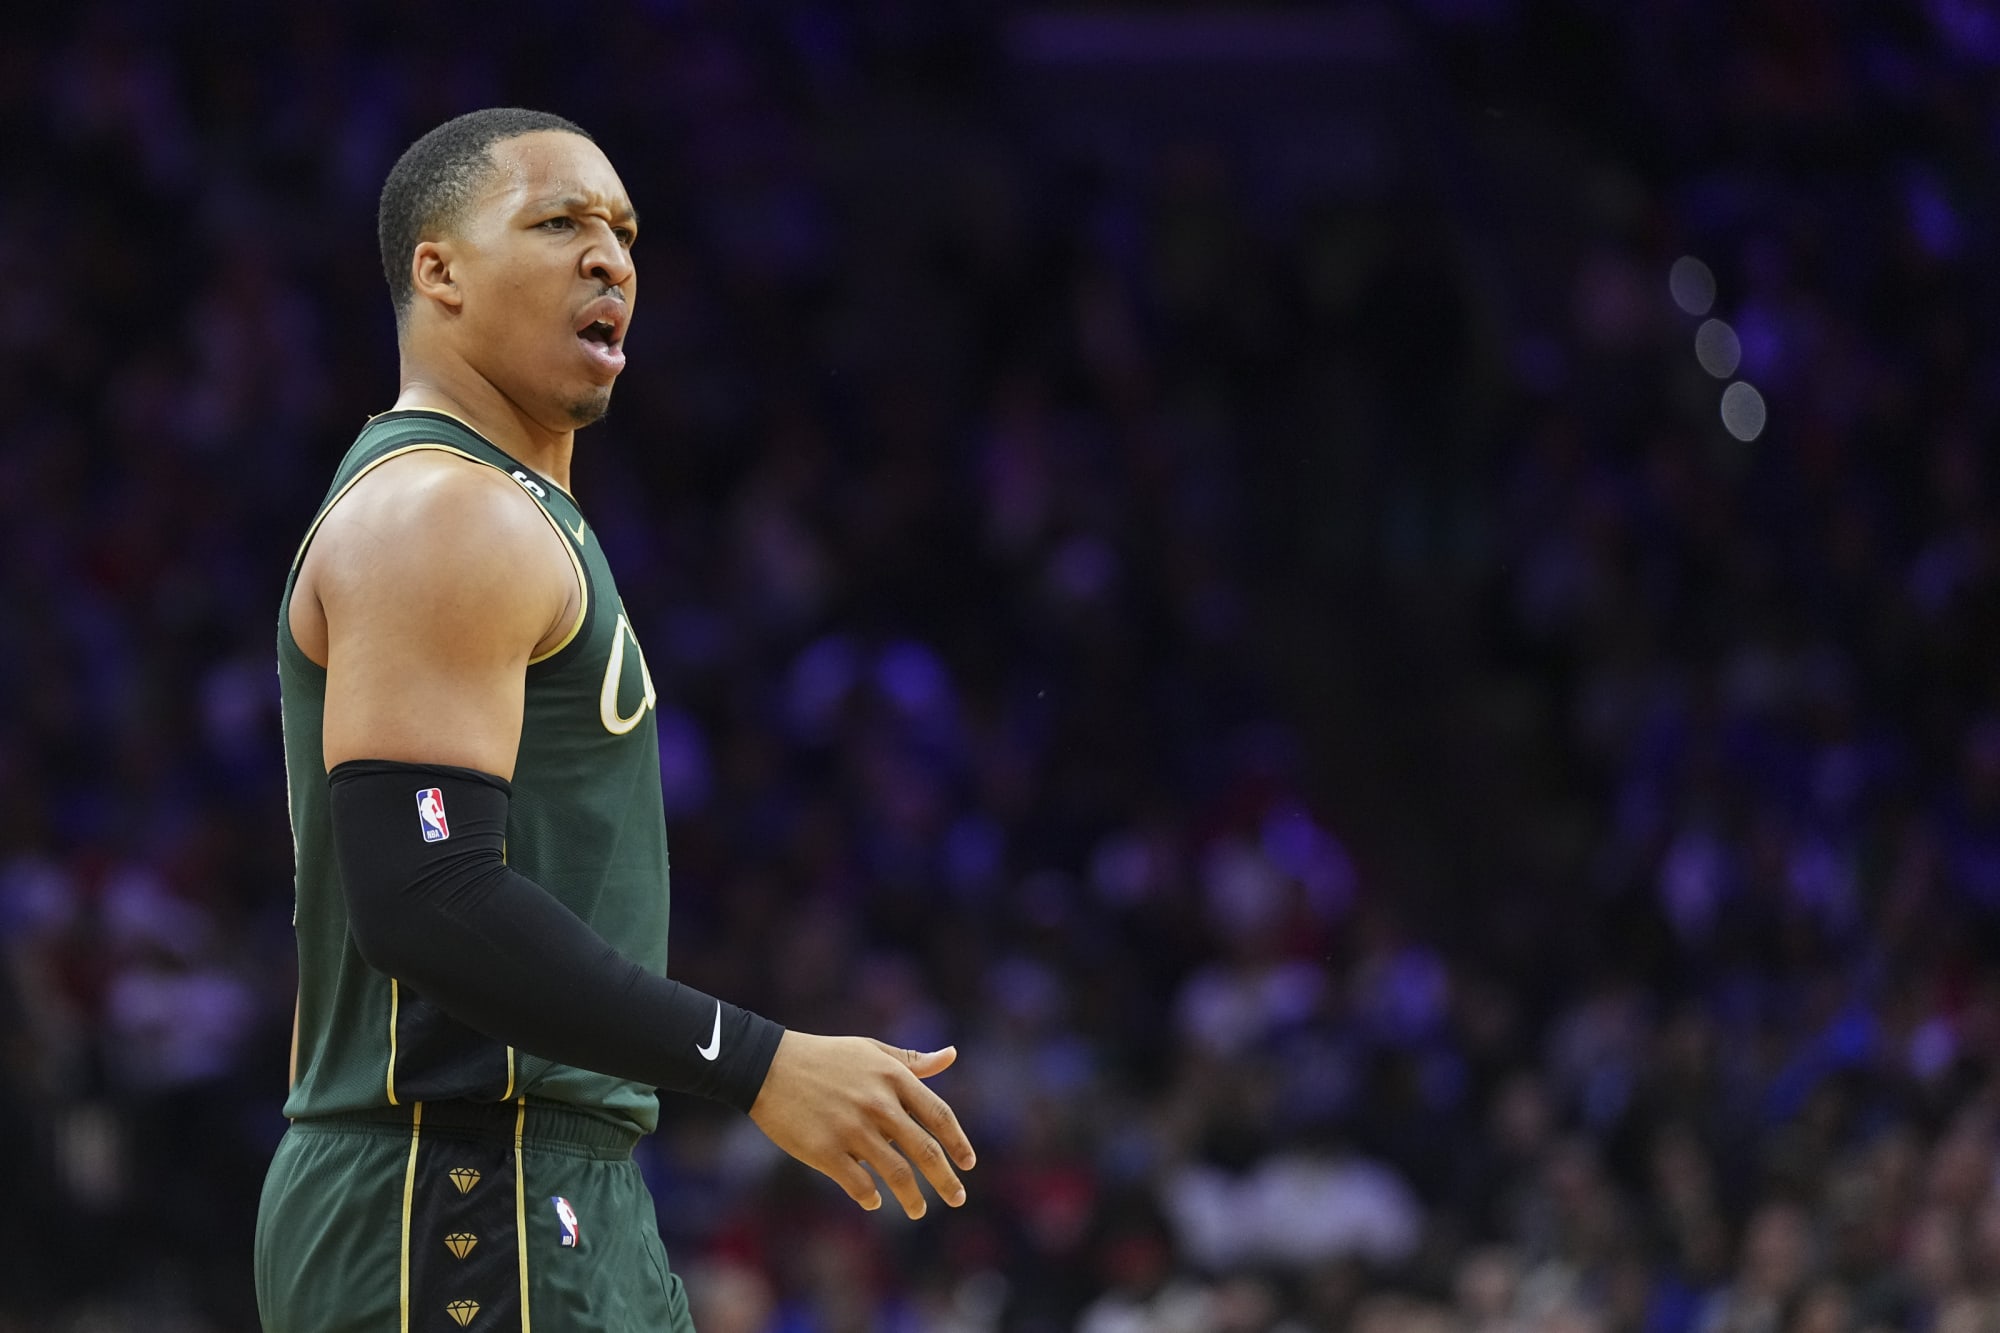 NBA rumors: Grant Williams wants $20M annually in free agency